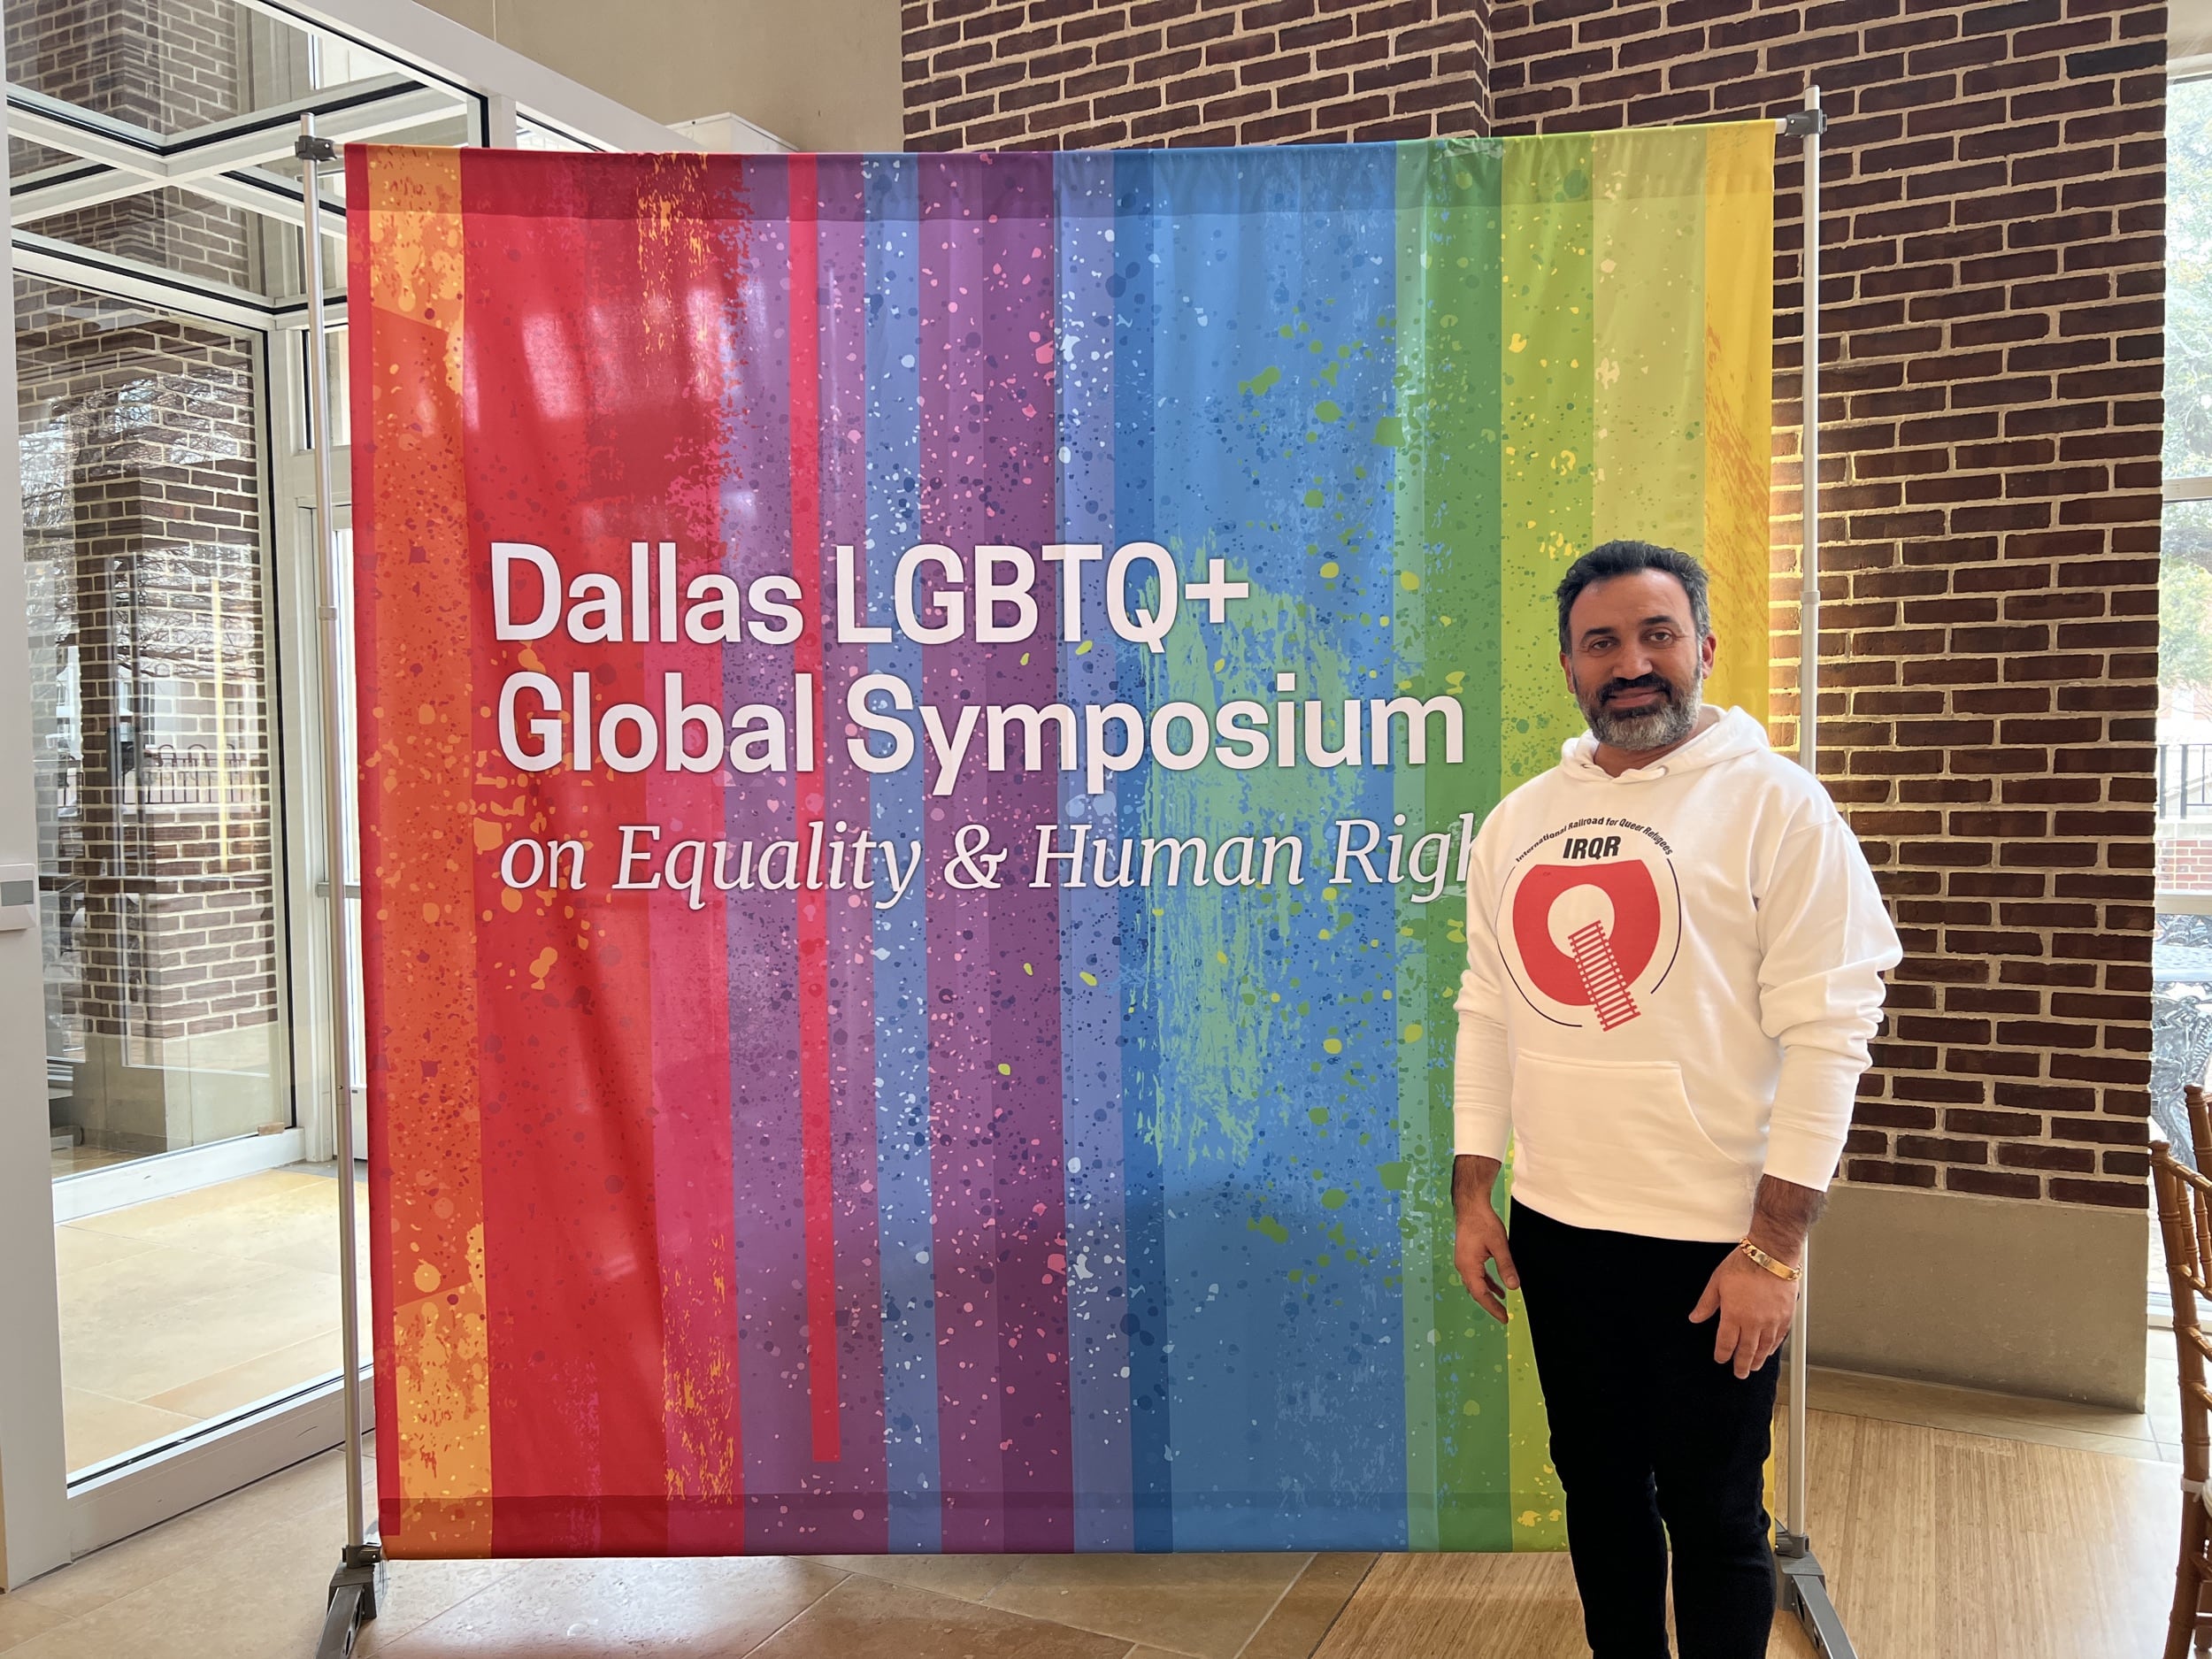 Arsham Parsi standing in front of a rainbow banner at the Dallas LGBTQ+ Global Symposium on Equality and Human Rights